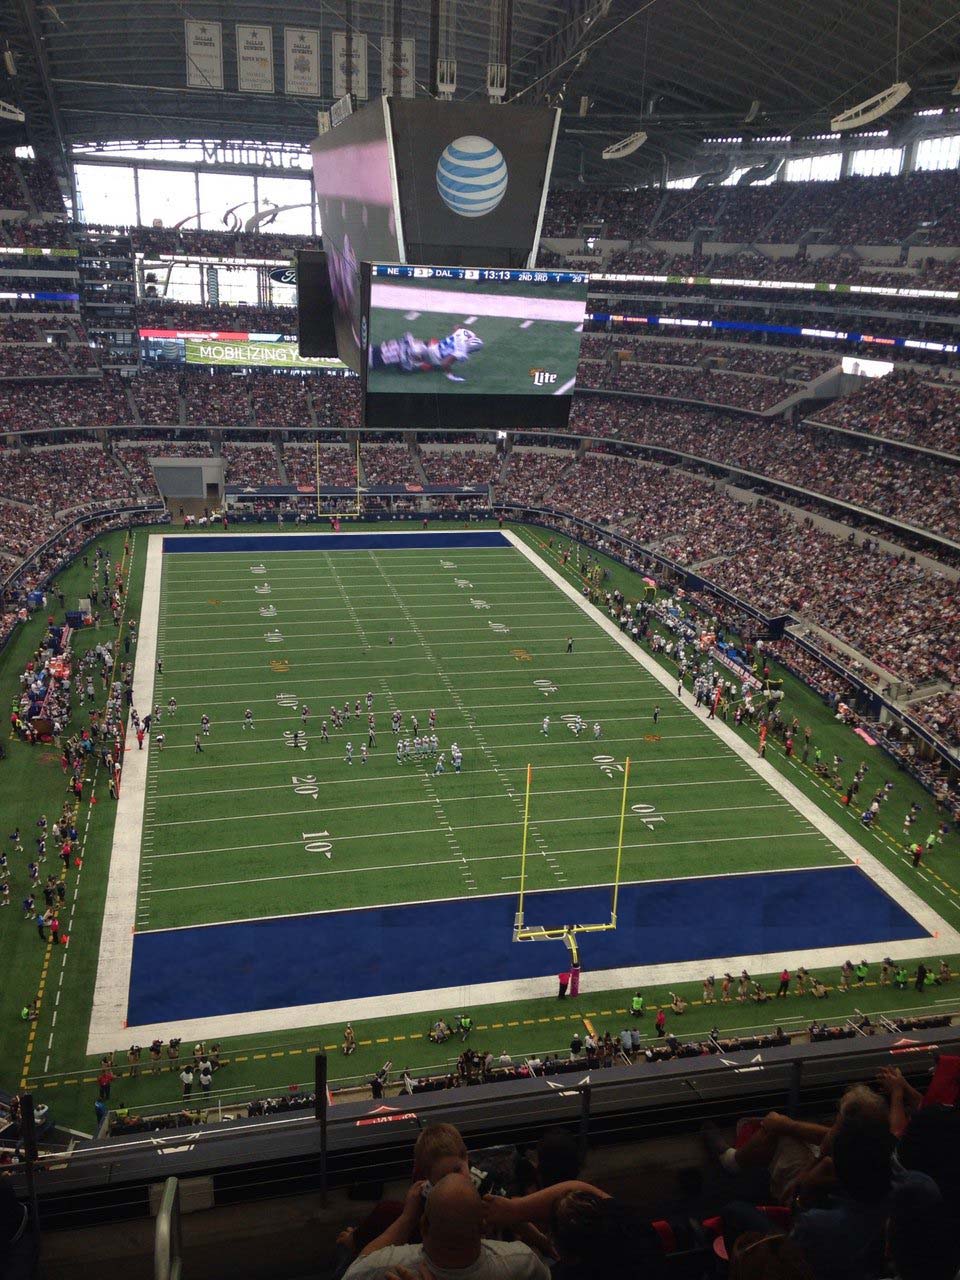 section 429 seat view  for football - at&t stadium (cowboys stadium)